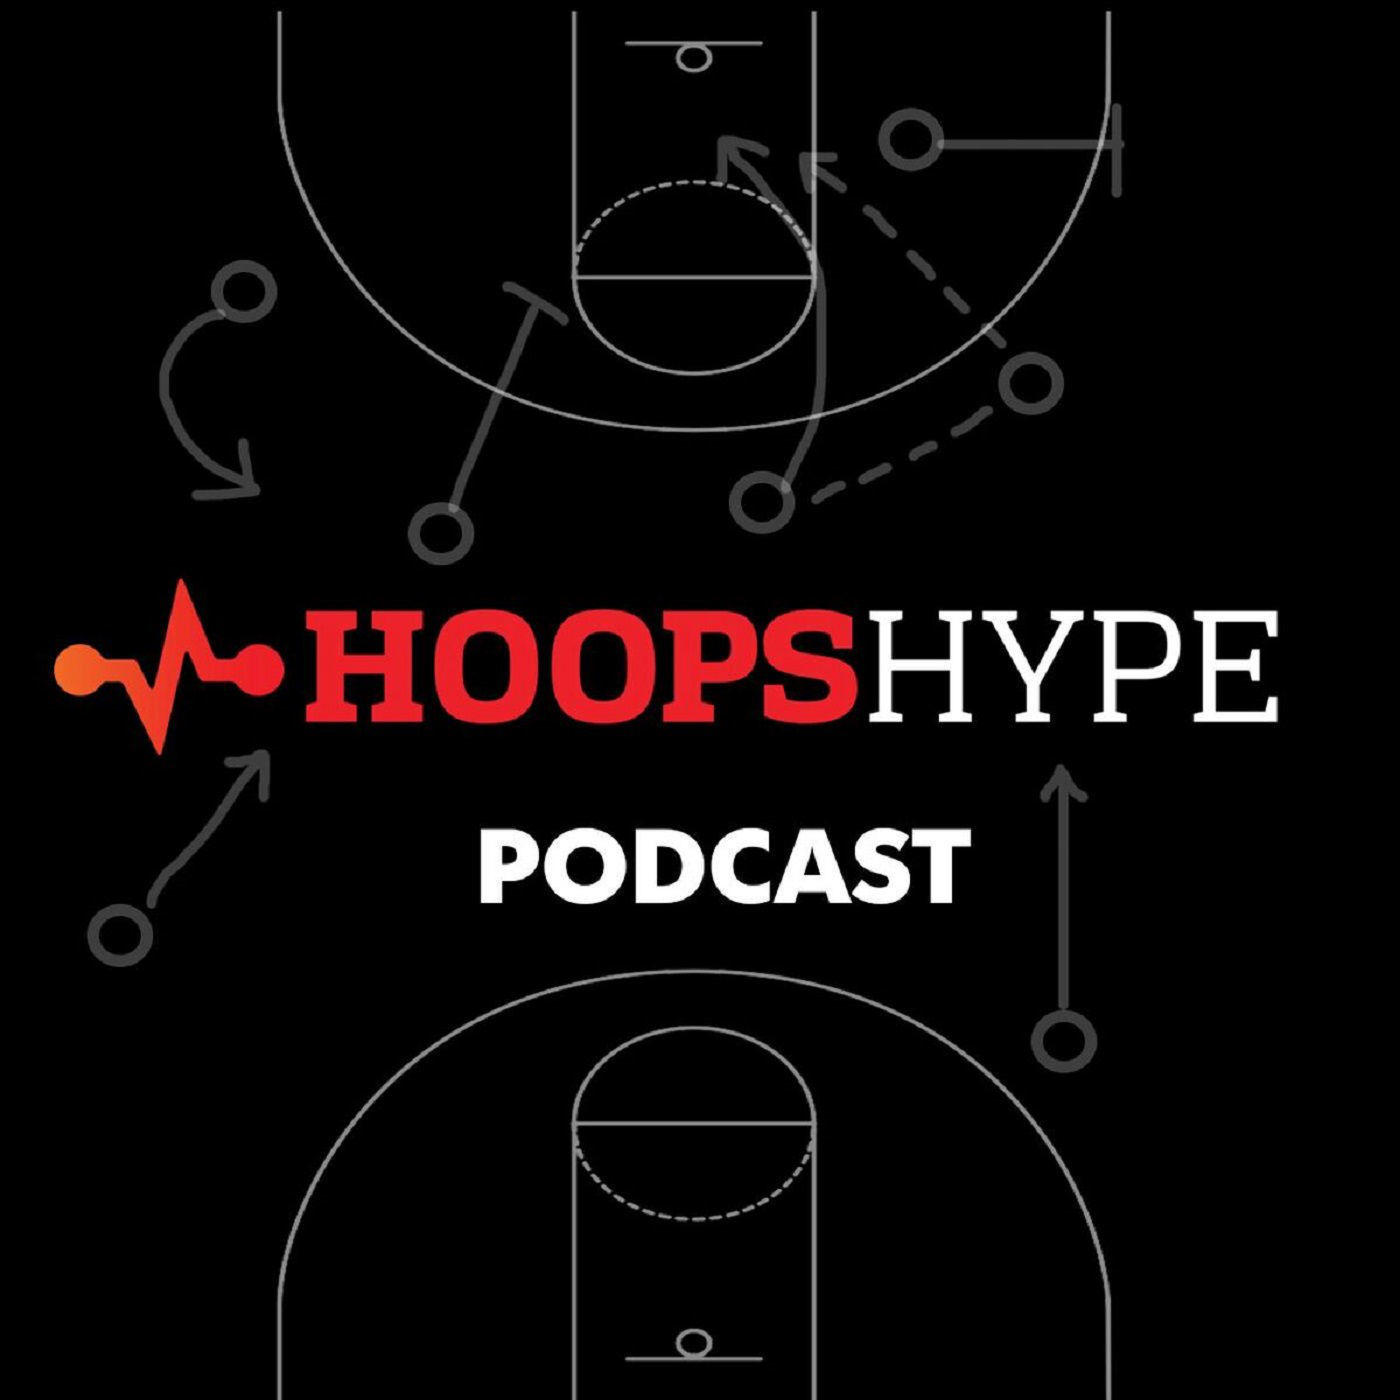 Lloyd Pierce on Trae Young, free agency for the Hawks, the future of Joel Embiid and Ben Simmons, Steve Nash college stories and more